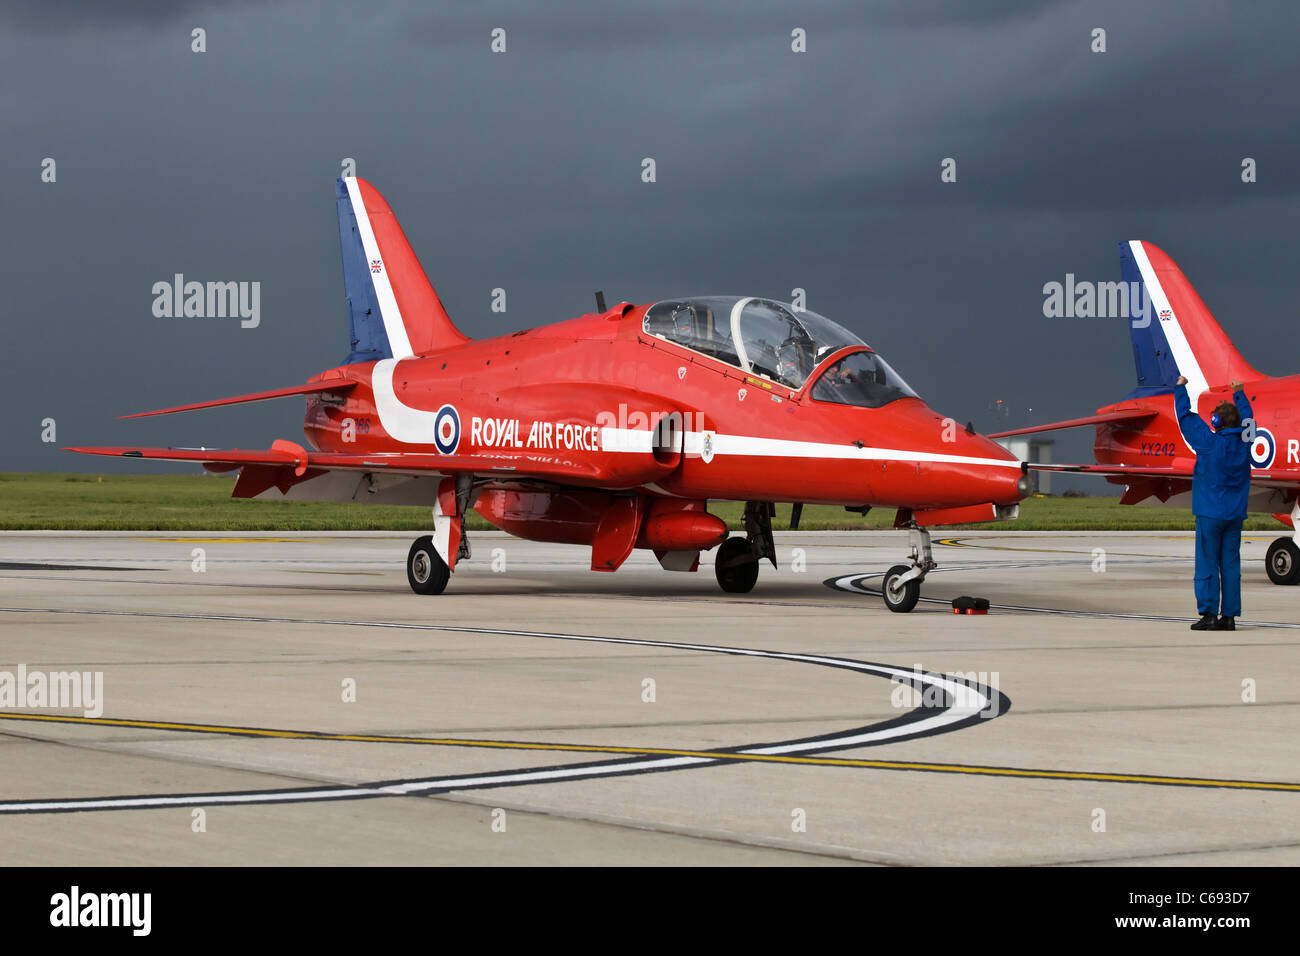 A Bae systems Hawk T1 training aircraft of the RAF's Red Arrows aerobatic team being marshalled back on to the apron Stock Photo